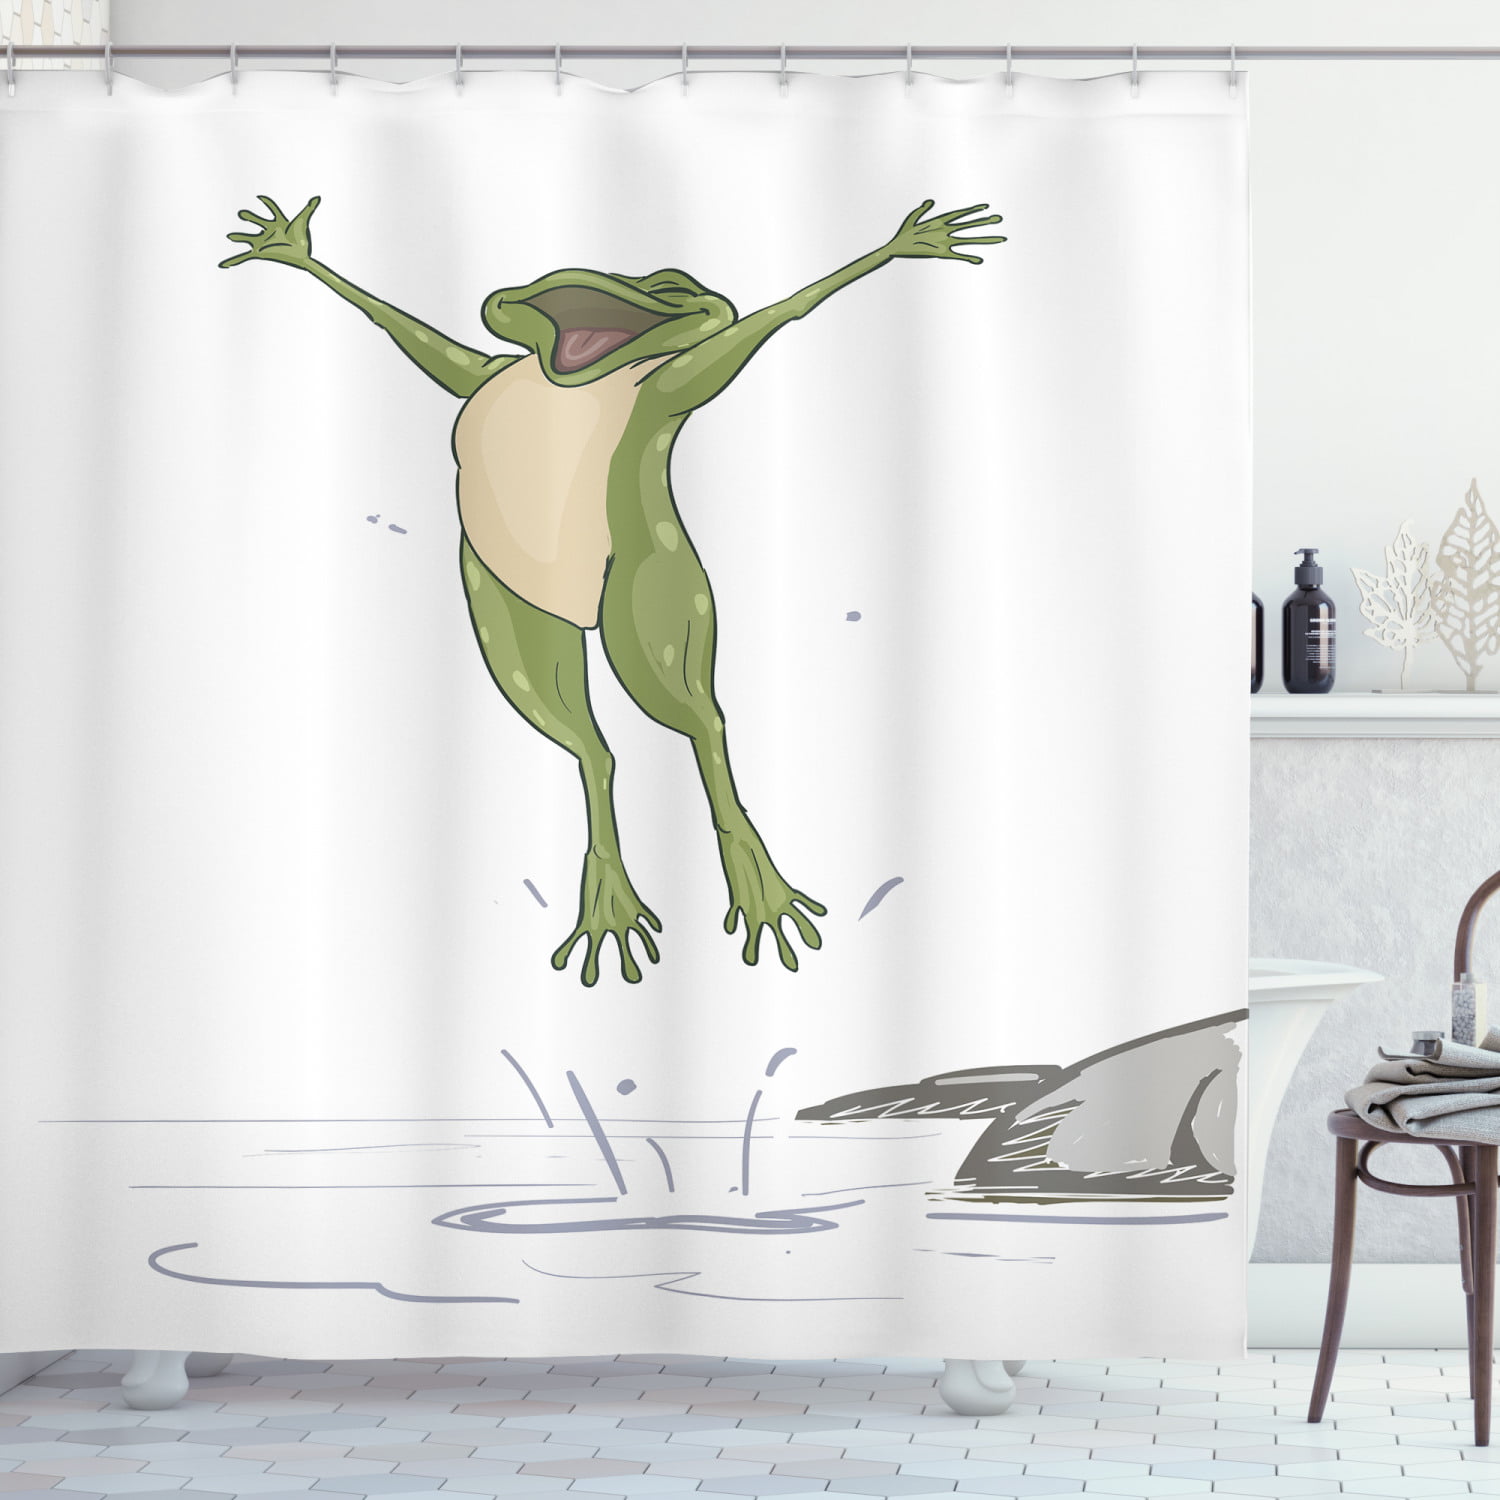 72" Funny Frog Faces Polyester Waterproof Bathroom Fabric Shower Curtain 12Hooks 